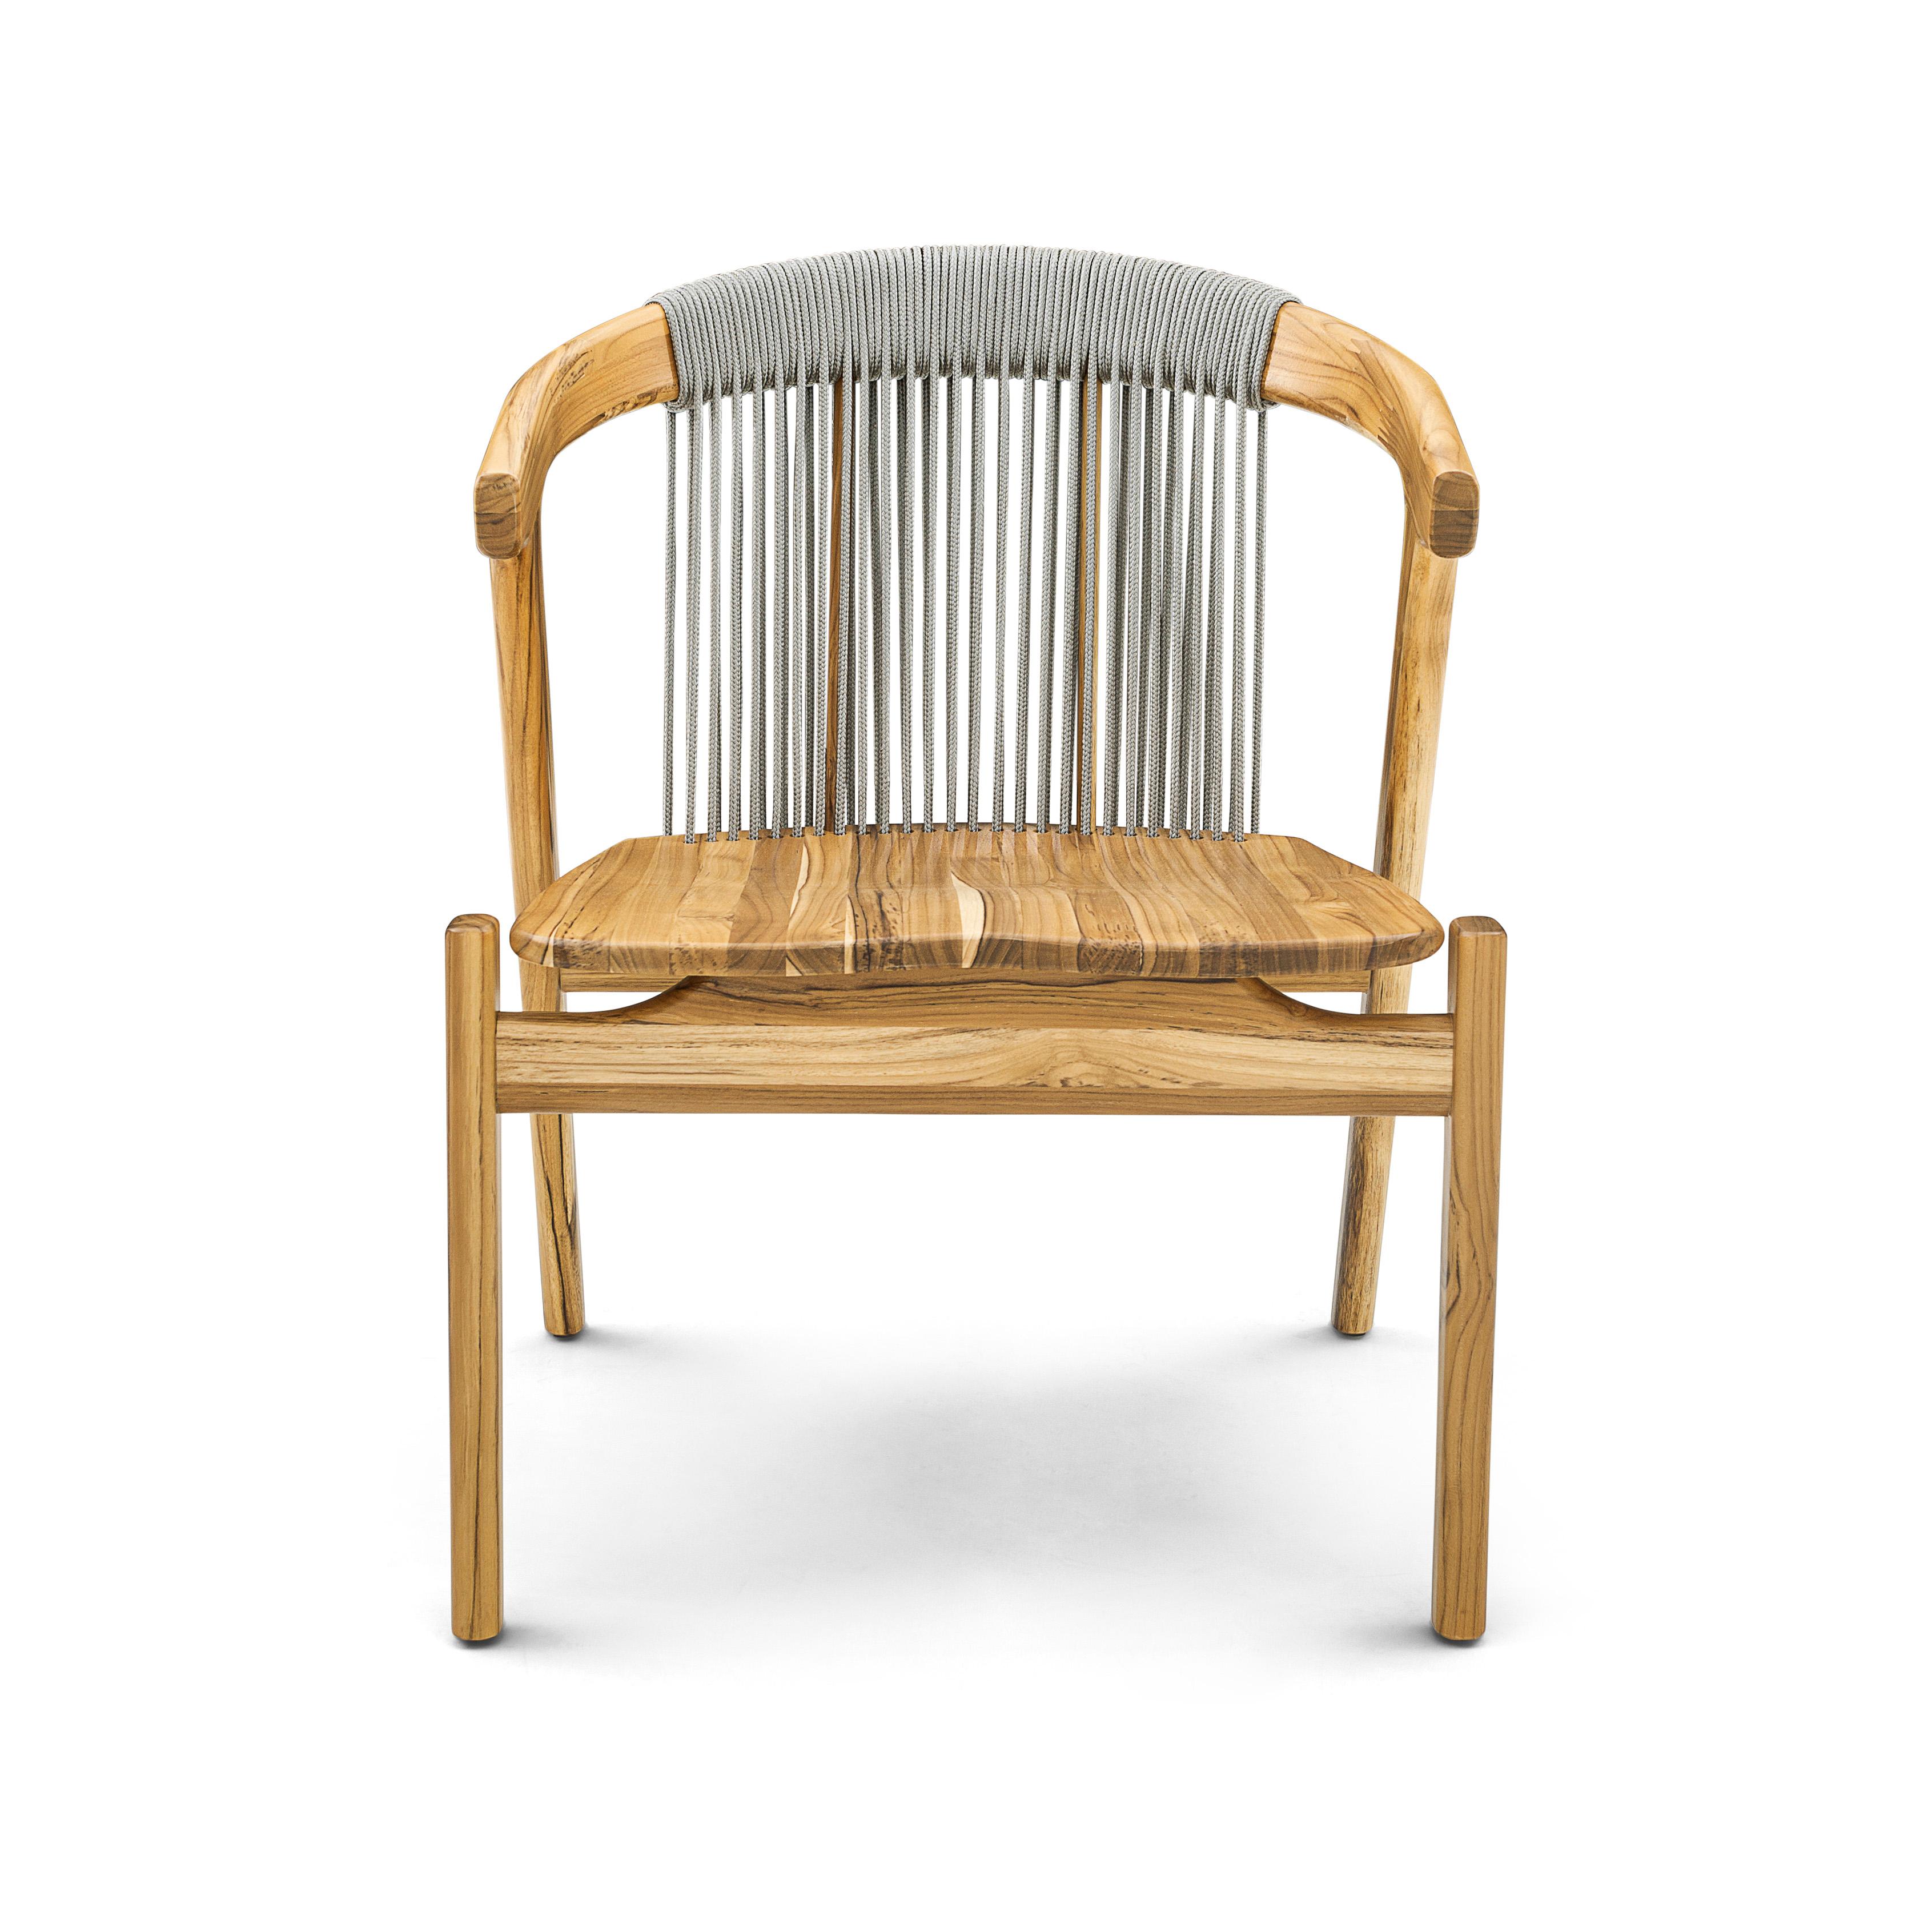 The Vine armchair was created by our amazing Uultis design team for an outdoor space, it has a beautiful teak wood finish for the legs, frame, and seat, and a curved back with silver vine roping, creating a unique piece that will be perfect for your